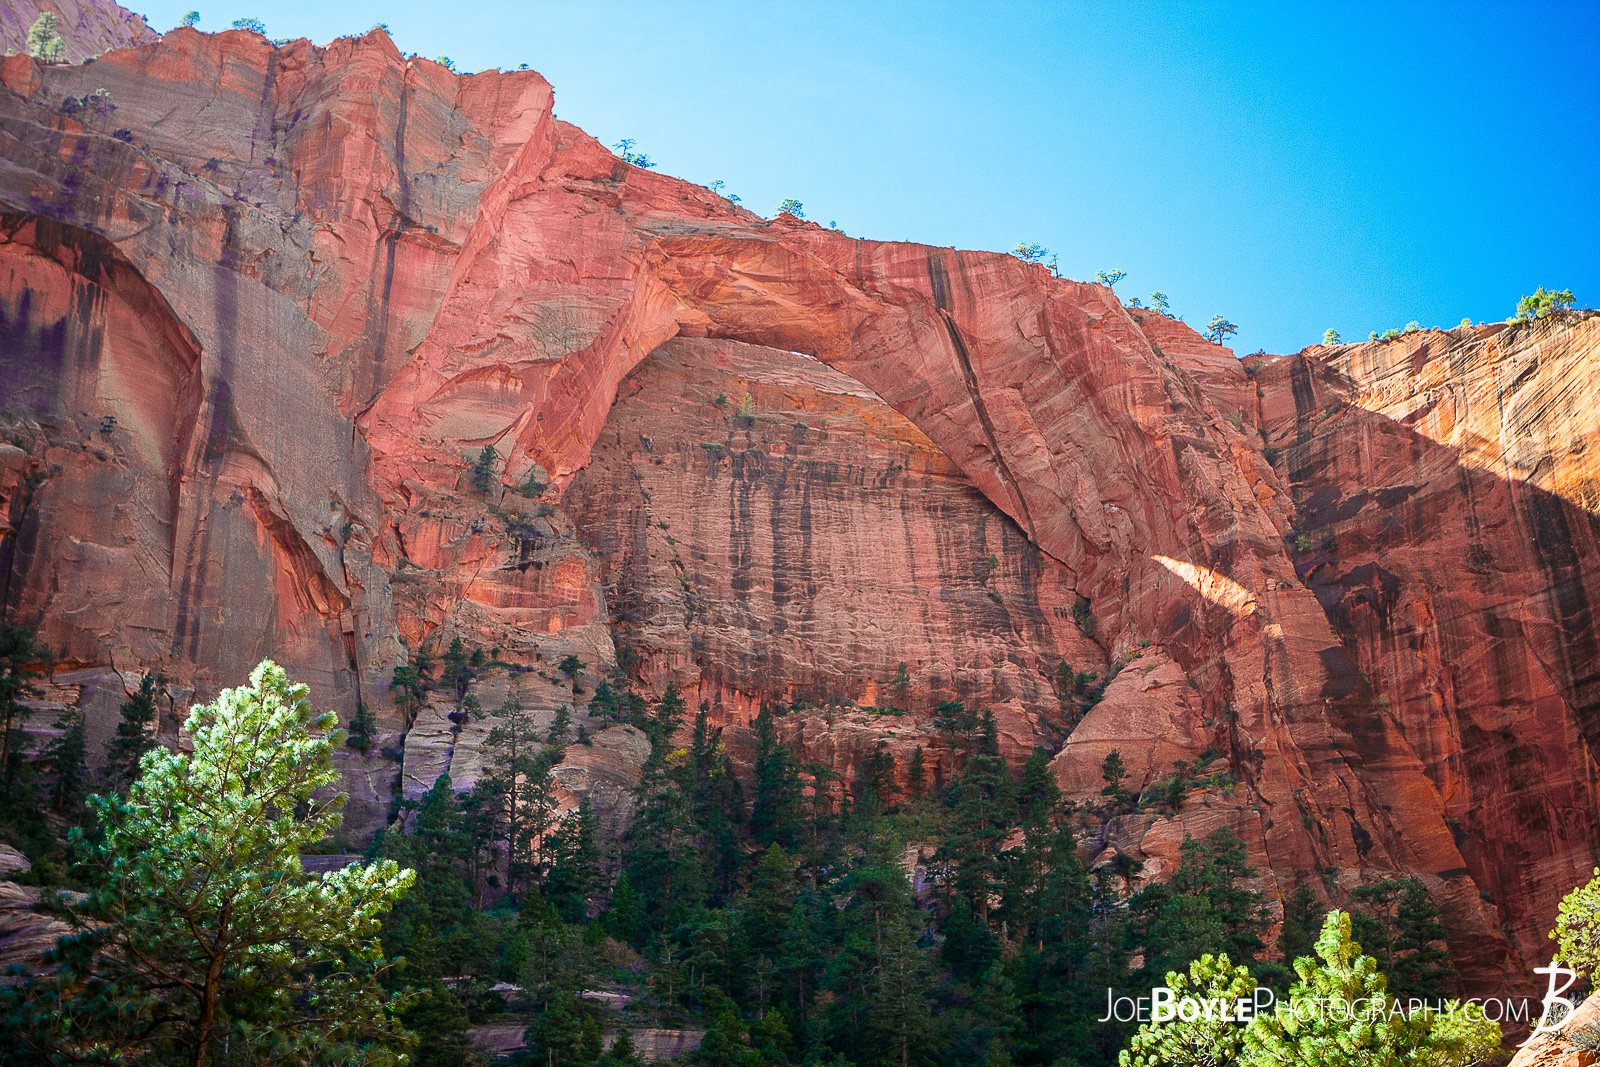  This is a photo of the Kolob Arch near the turn around point on the Kolob Canyon Trail in Zion National Park. The trail was a beautiful and pleasant 14 mile round trip. My hiking buddy Caleb and I hiked it together and saw the Koleb Arch near the half way point. Interestingly, I noticed the terrain changed quite a bit as we descened. It started off as I expected,... rocky. Their were large sections, however that were quite sandy. That slowed us down a little bit, but not too much. I just didn't expect it! Here are some links to more articles and and hiking info about the Koleb Canyon Trail, Koleb Arch, other hiking trails in Zion National Park and a Map of Zion National Park. 